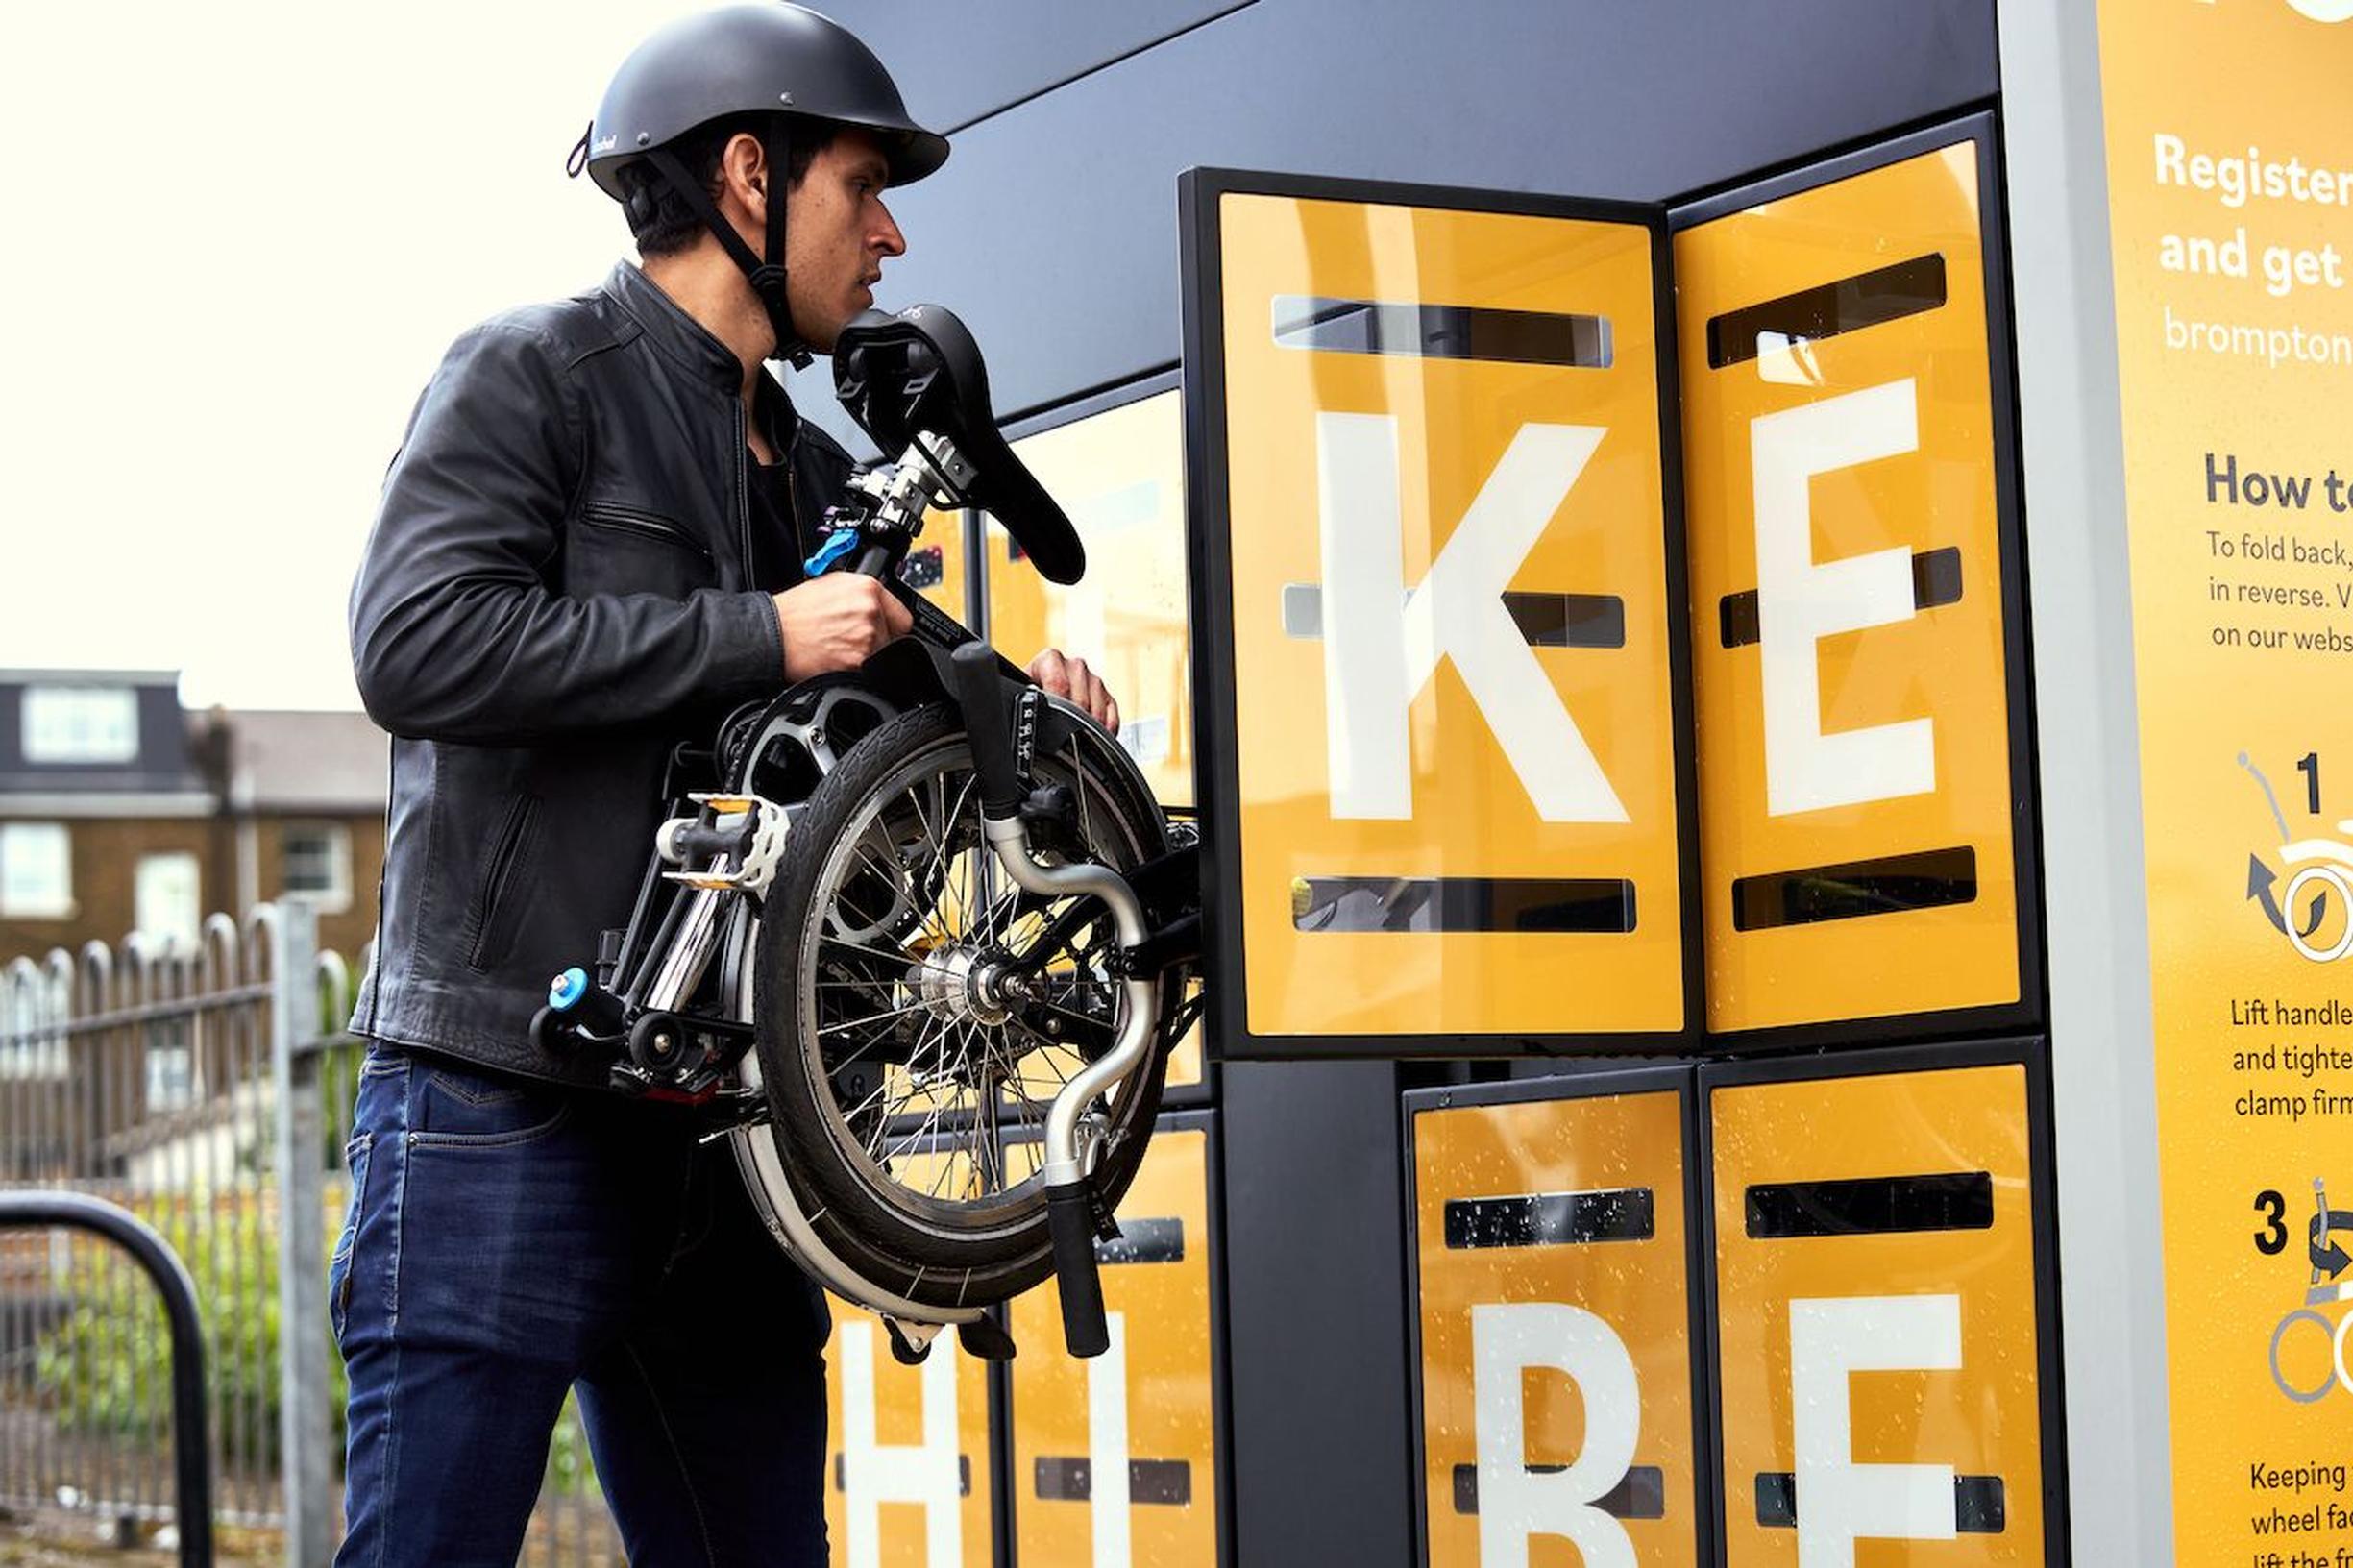 Brompton bikes are available to hire from more than 70 docks across the UK